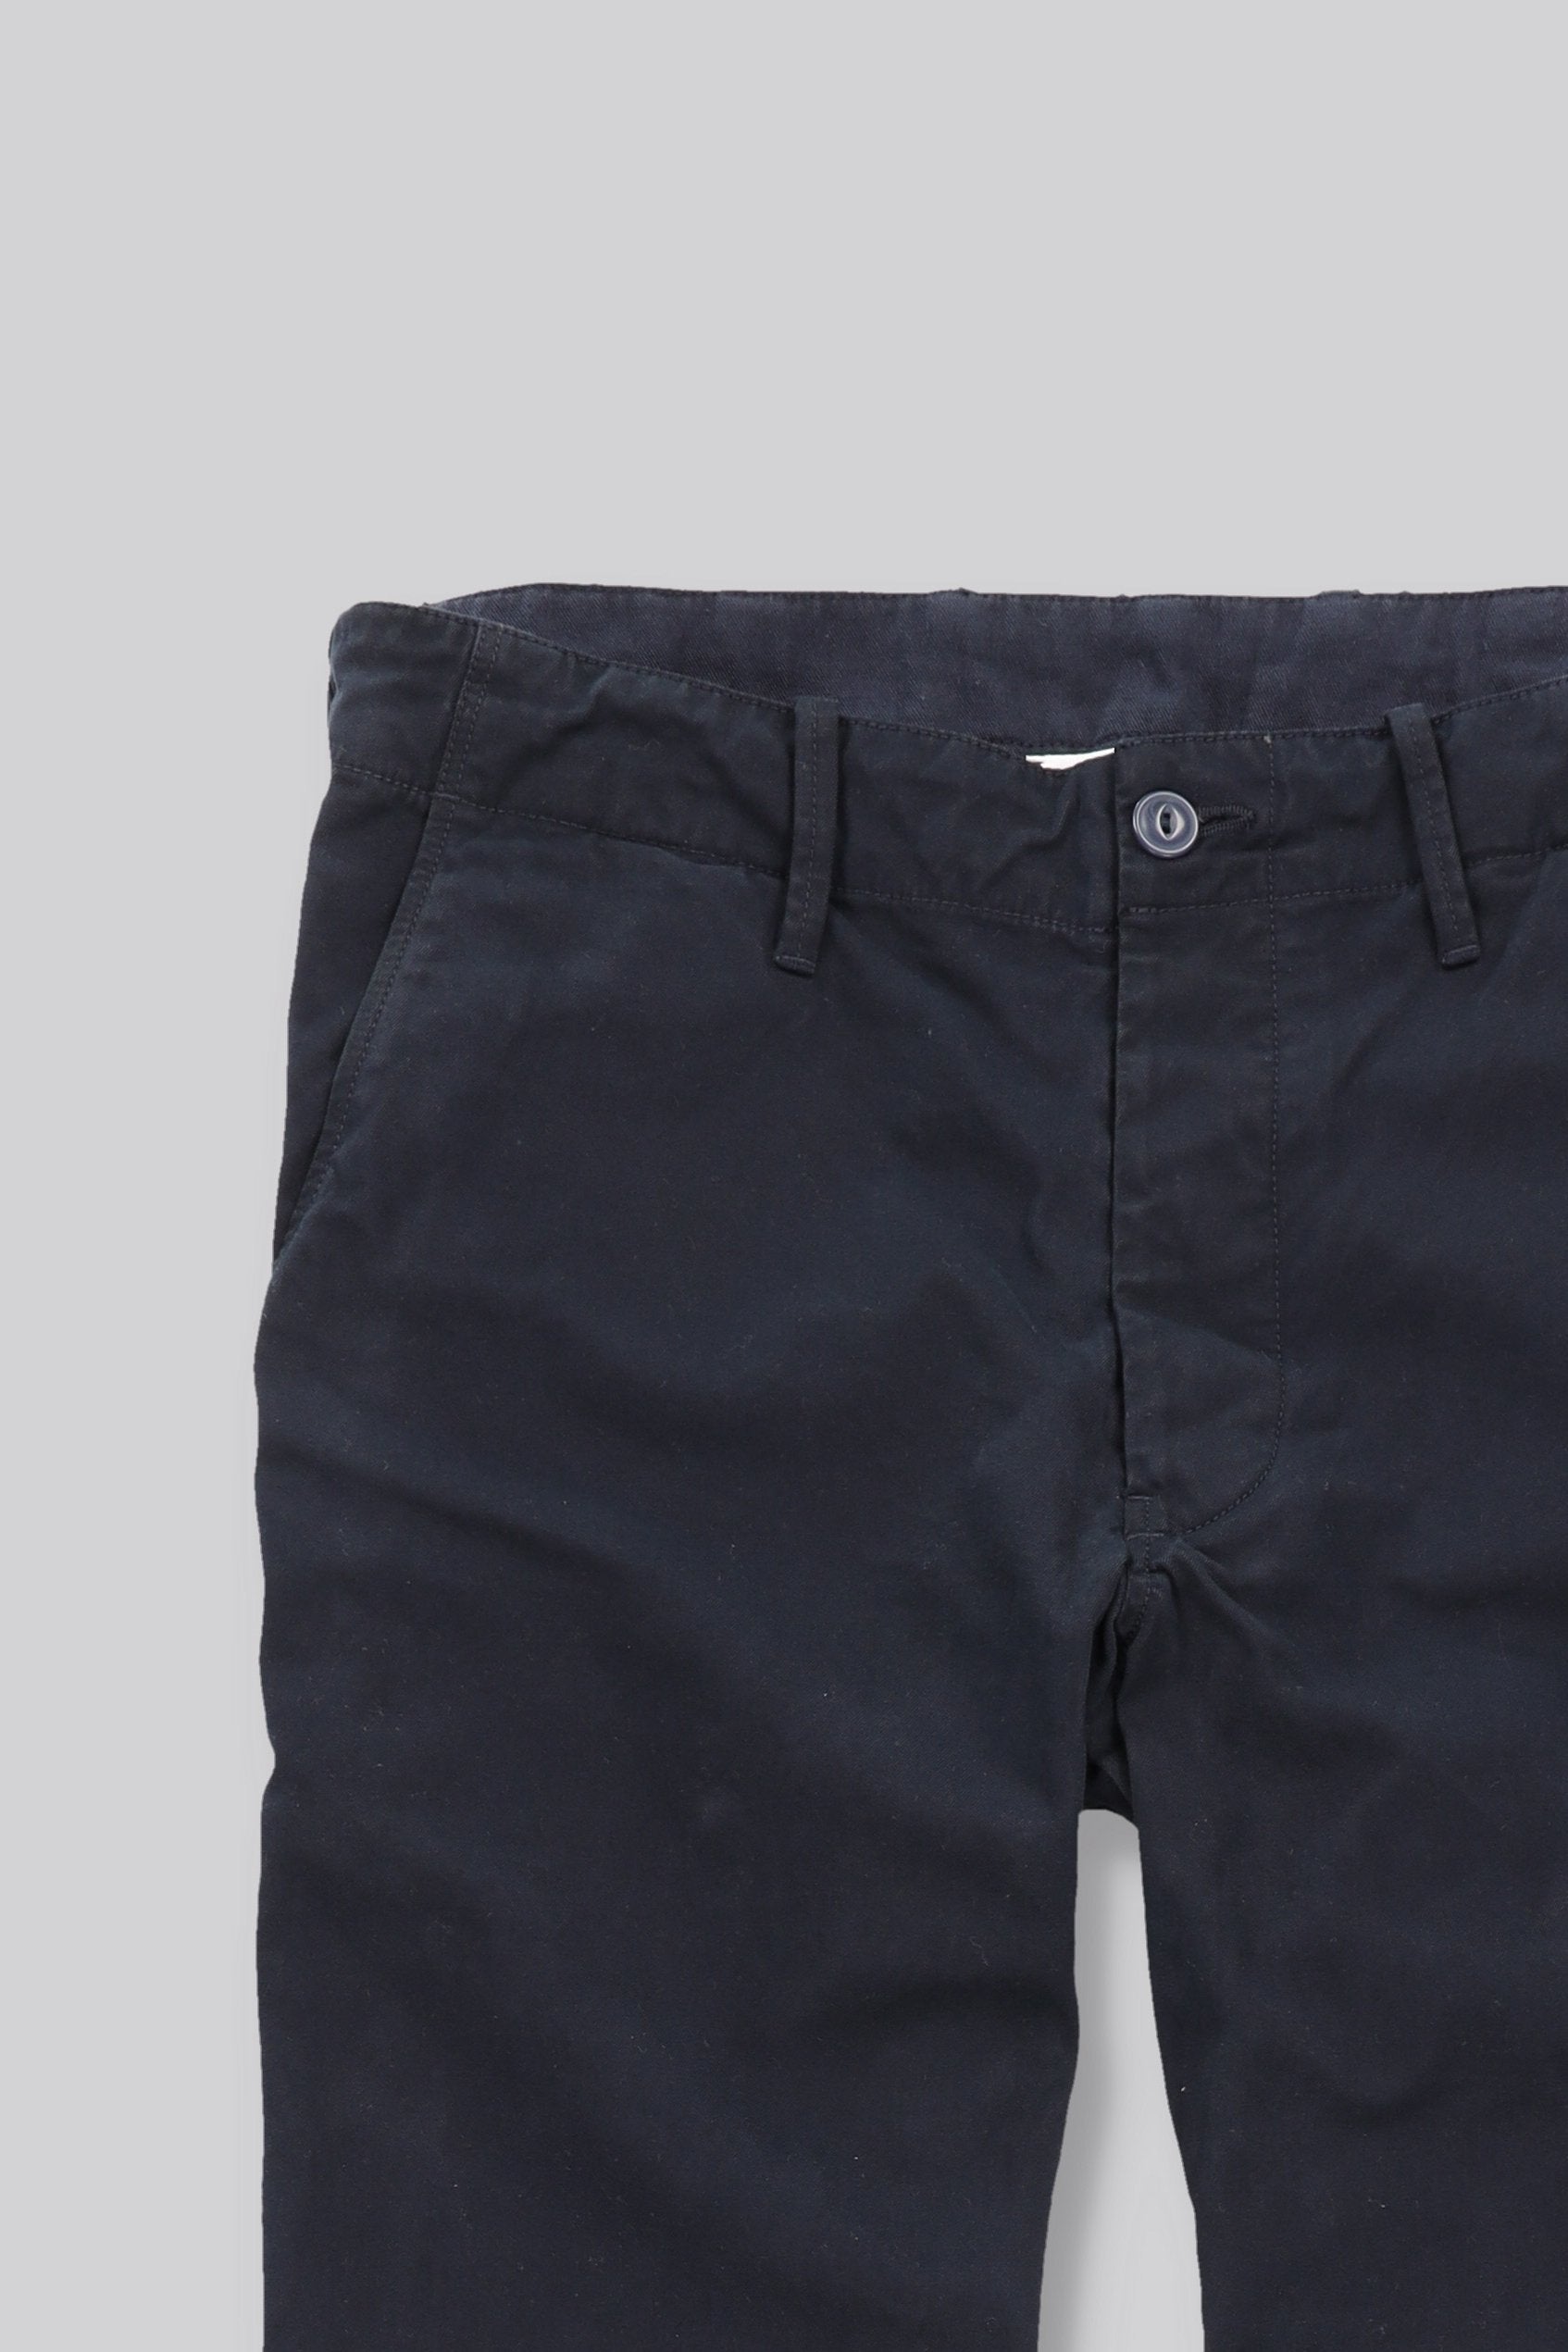 Men's Button Fly Chino Navy